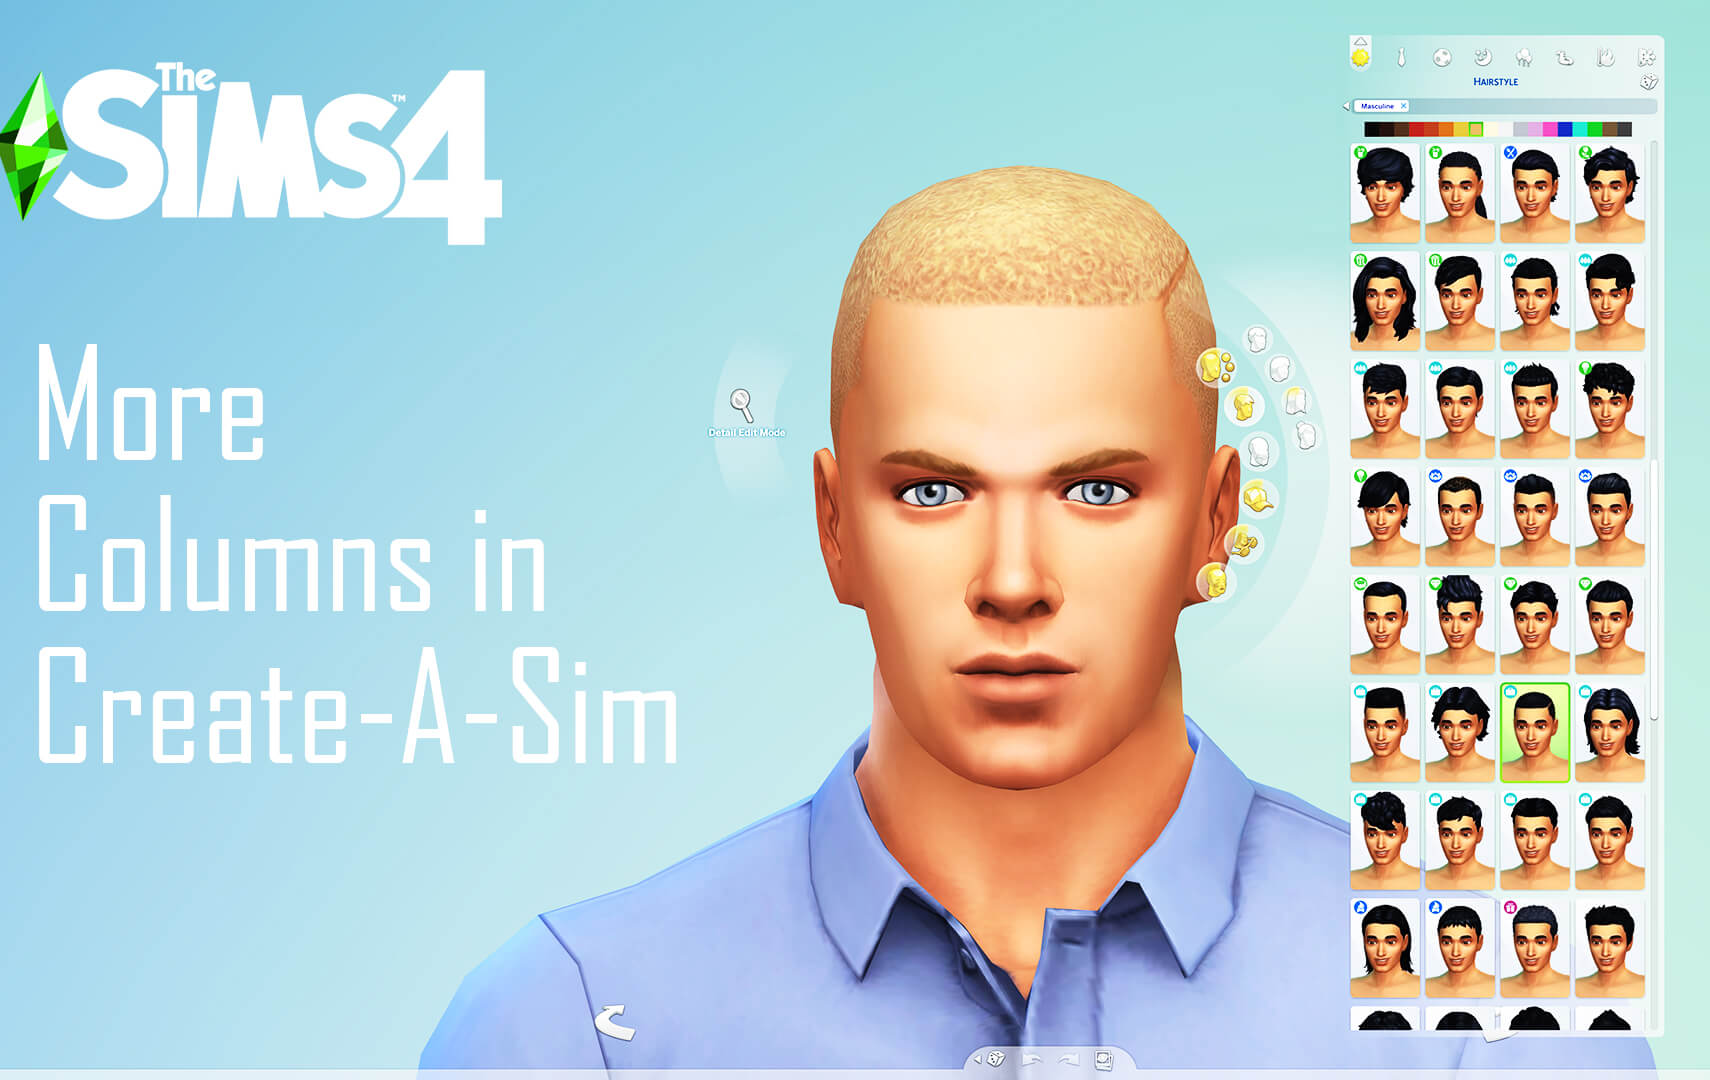 sims 4 custom content not showing